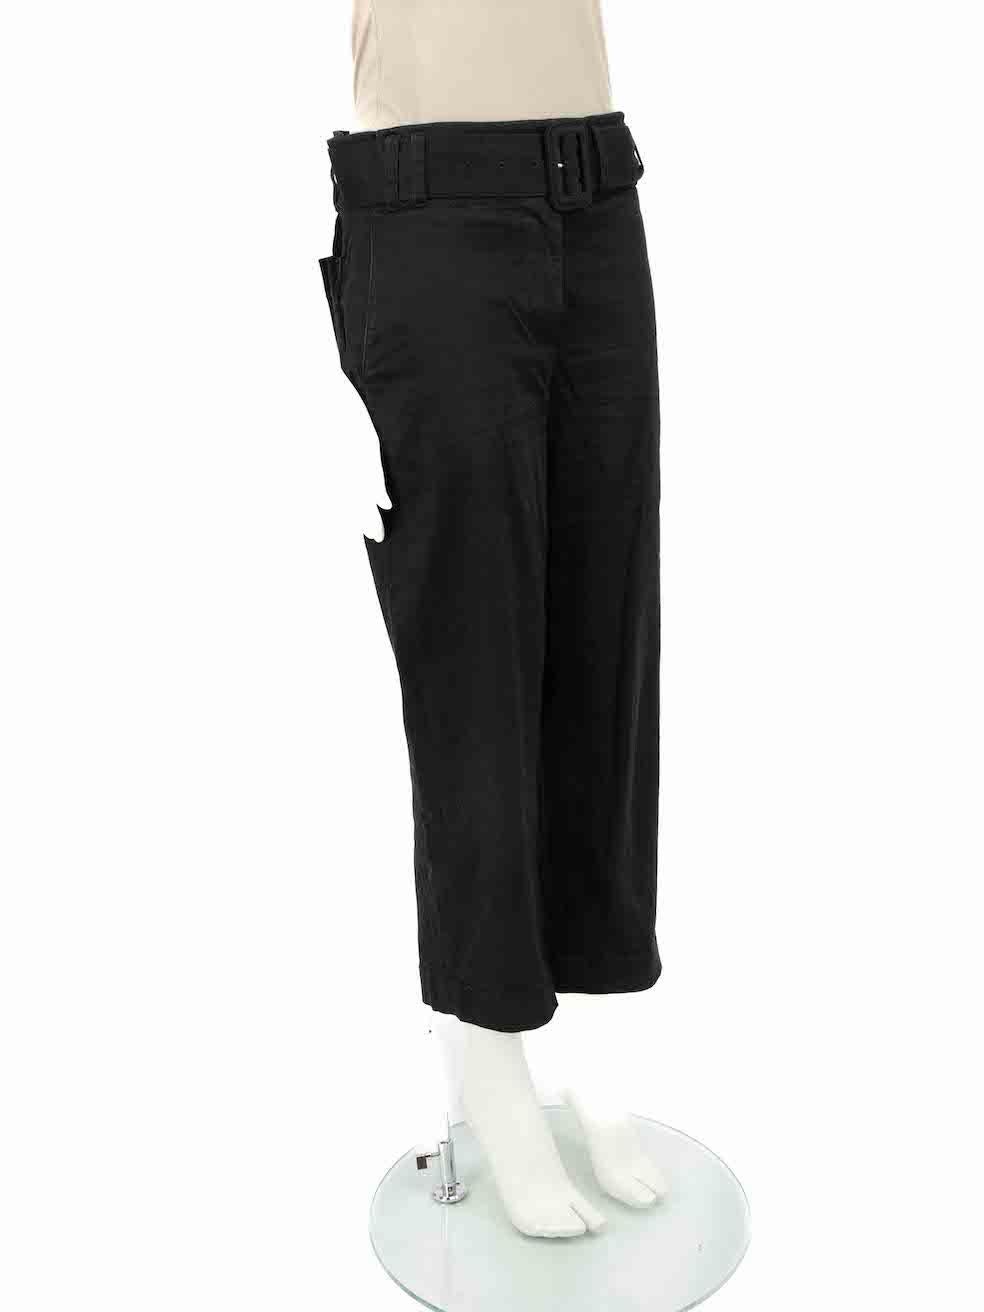 CONDITION is Very good. Minimal wear to trousers is evident. Some fraying and wear is evident around eyelet on belt and minor abrasion to front fly edge at waistband on this used Proenza Schouler designer resale item.
 
 Details
 Black
 Cotton
